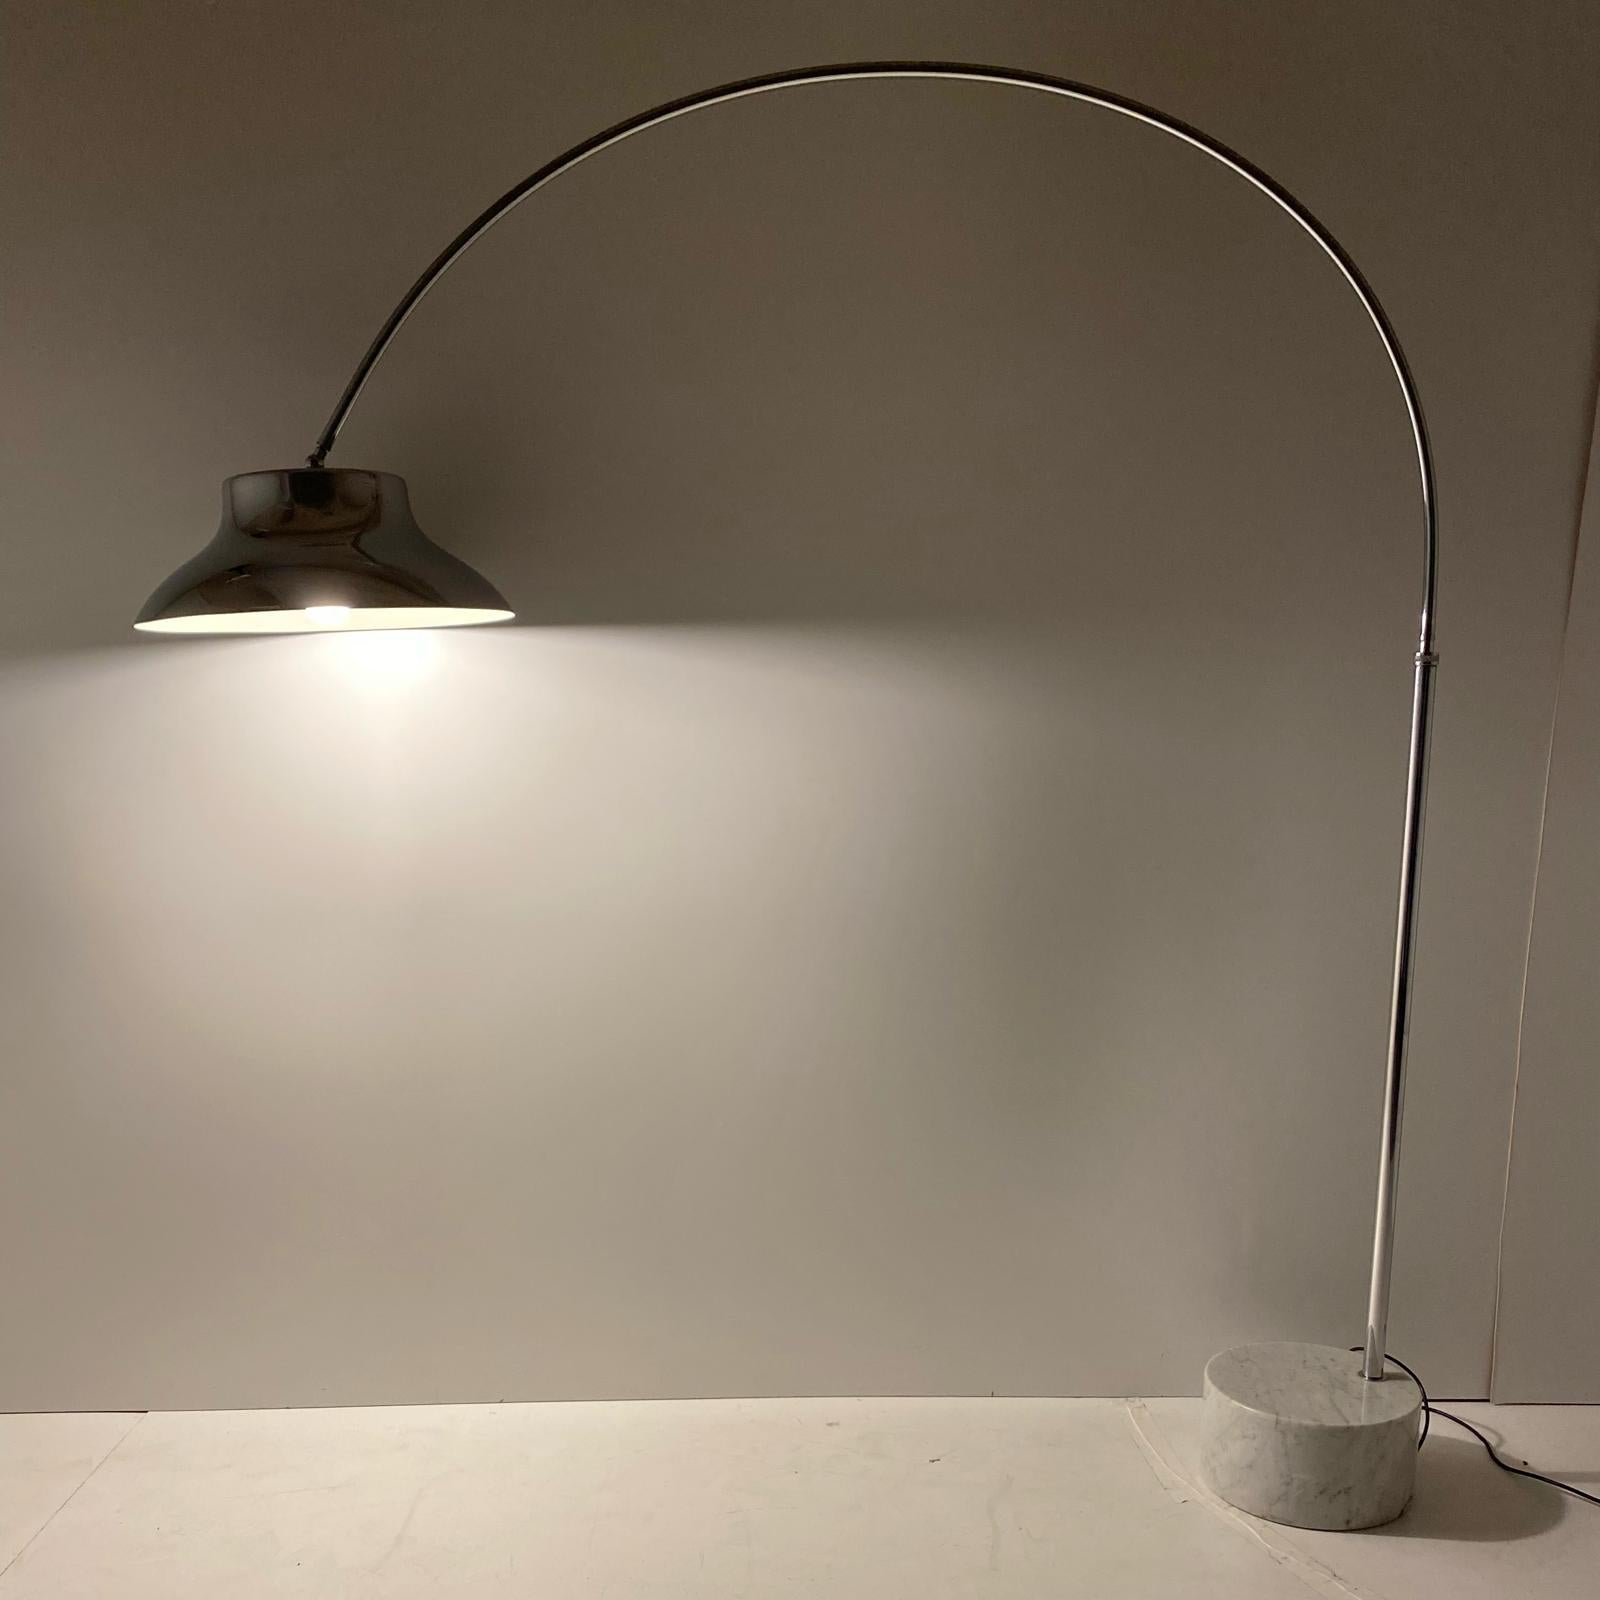 Xetra large vintage chrome arc lamp made in Italy in the 1960s. Carrara marble base with chrome-plated frame and shade.

Flexible and adjustable pole that can be moved back and forth. Also, the height ranges from a minimum of 185 cm to a maximum of